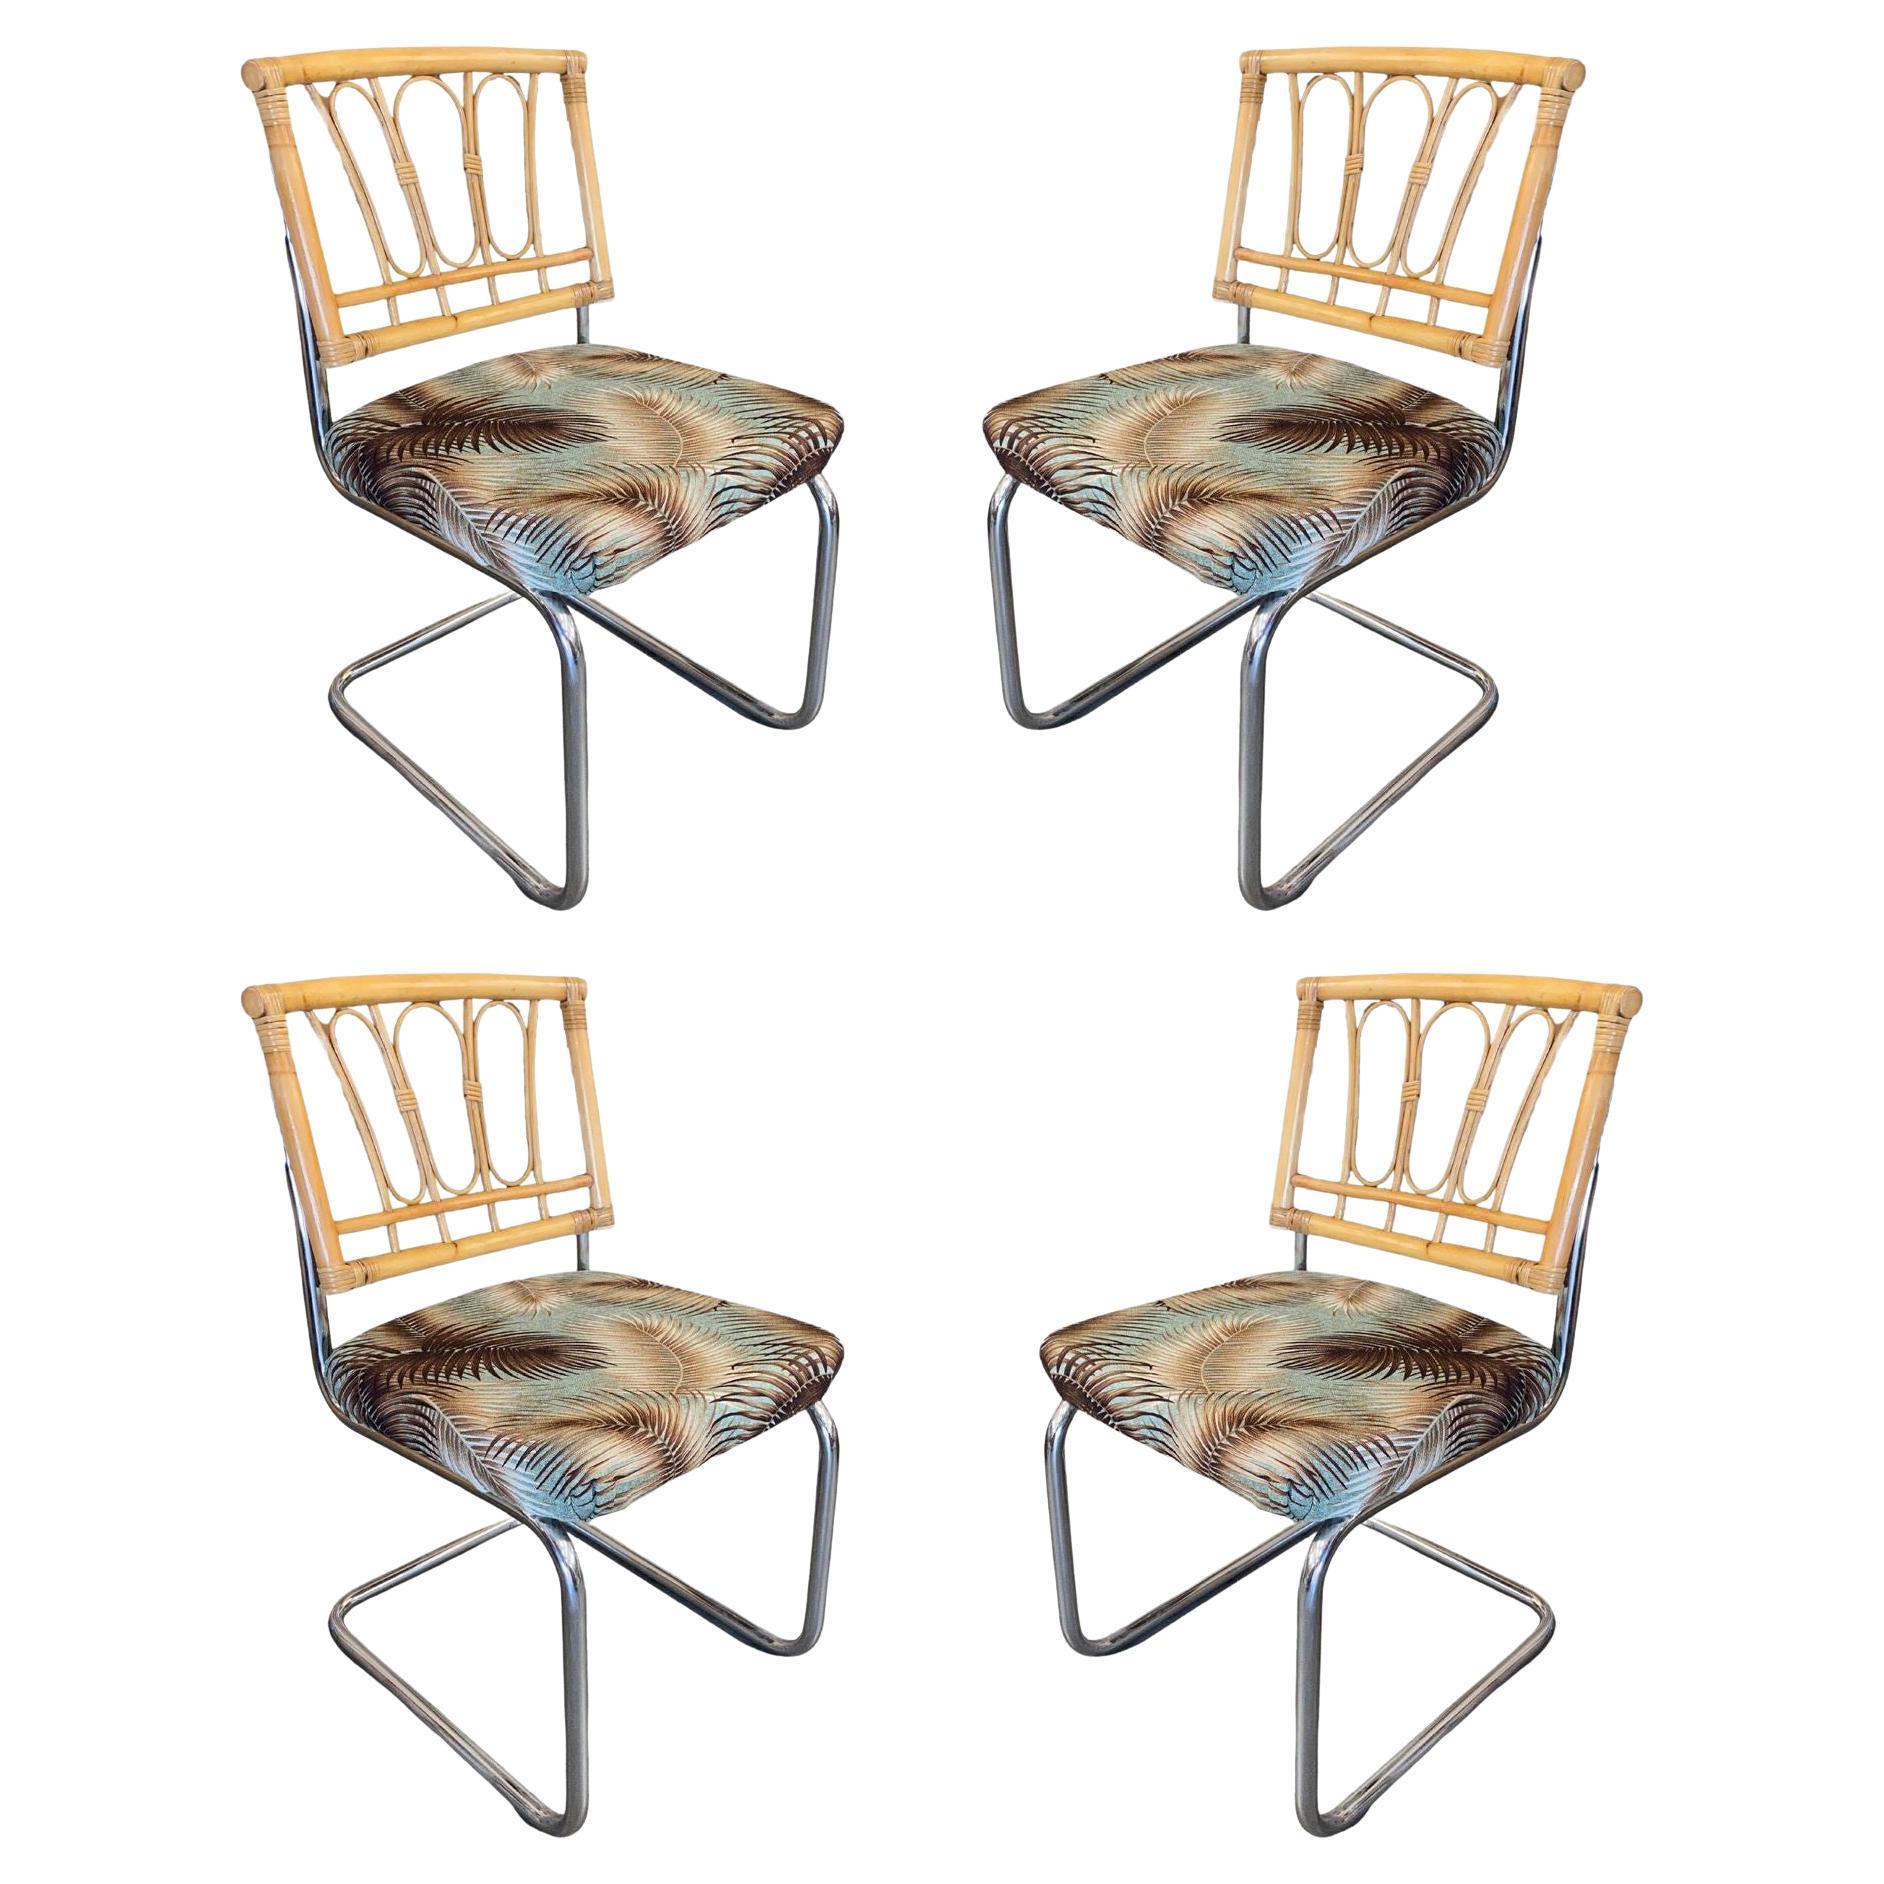 Rare Restored Marcel Breuer Rattan Back Chrome "cesca" Chairs By Virco, Set of 4